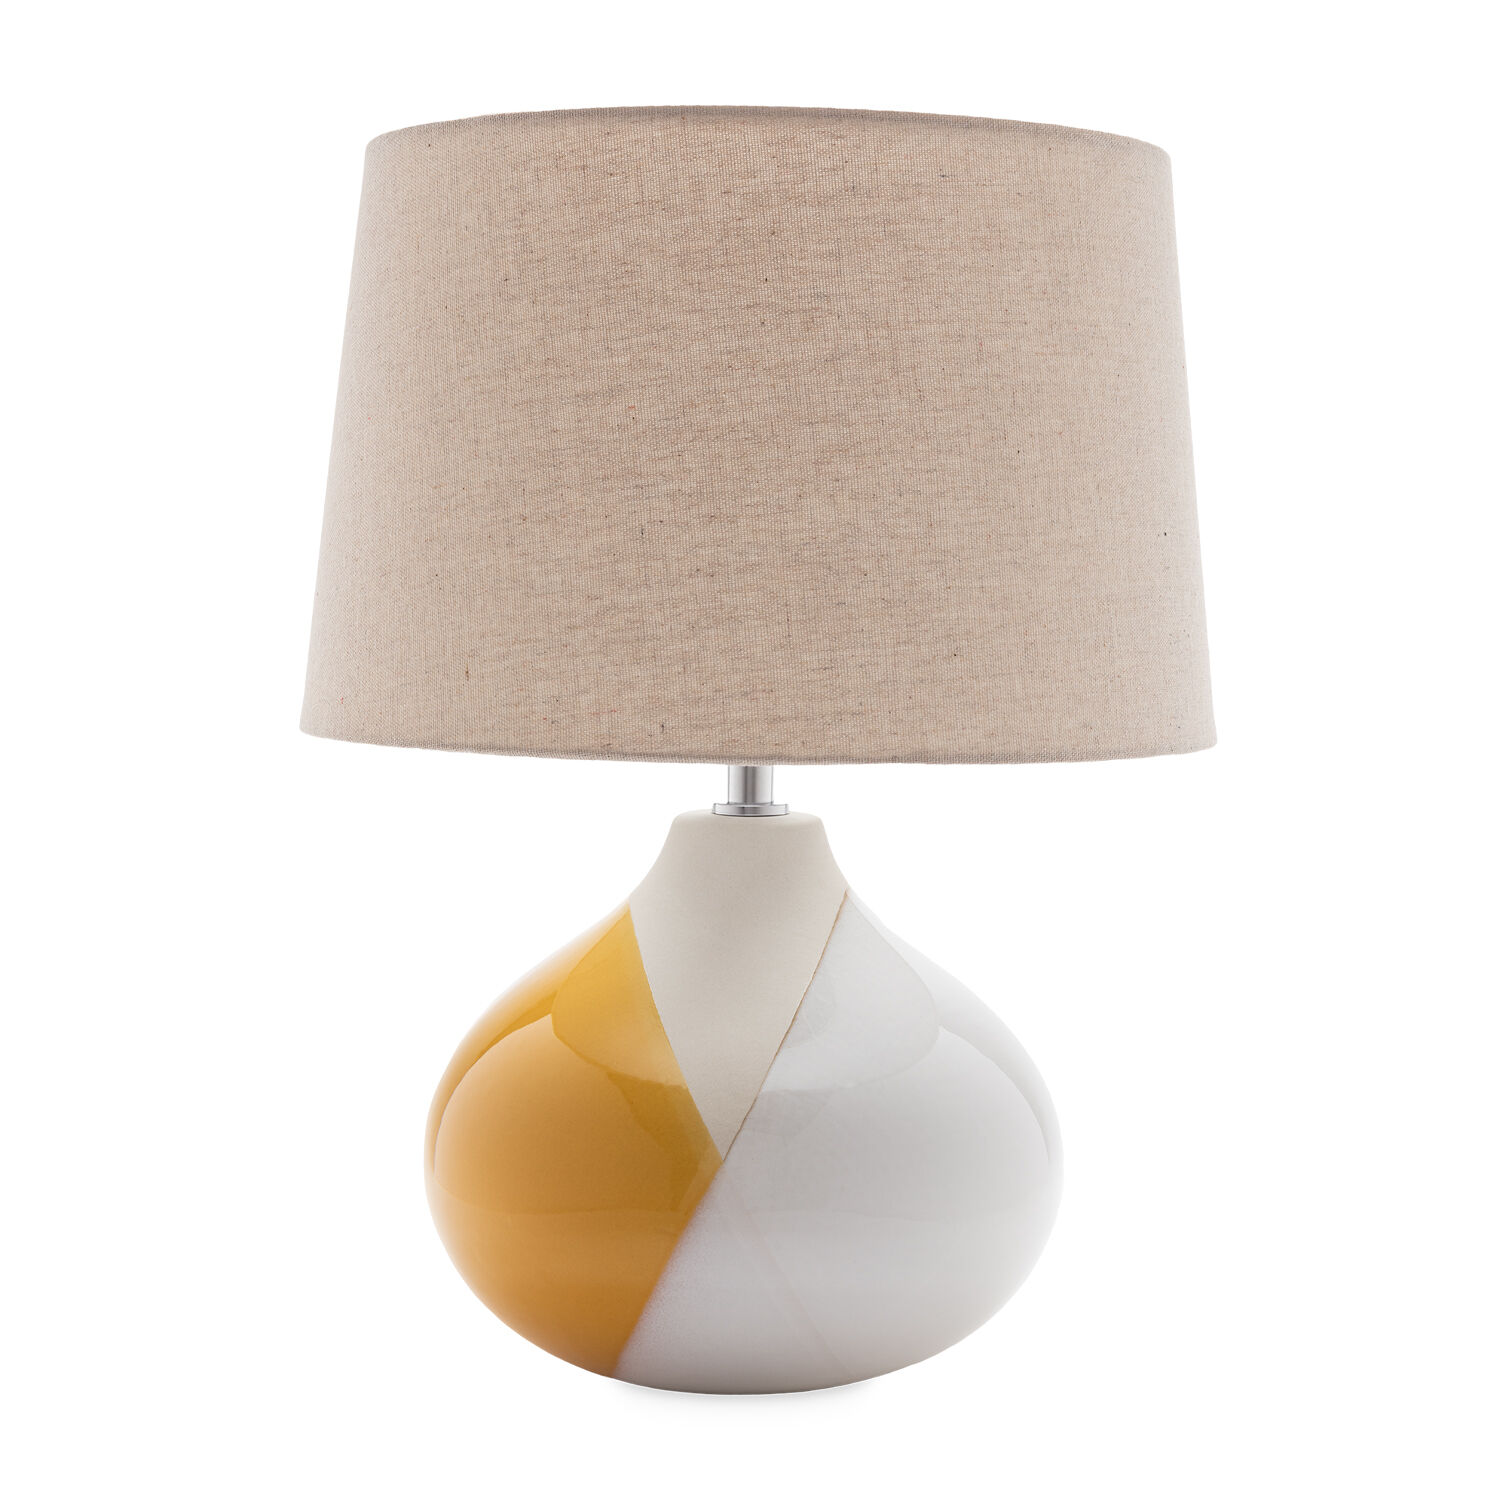 Penelope Table Lamp Home More, Penelope Table Lamp